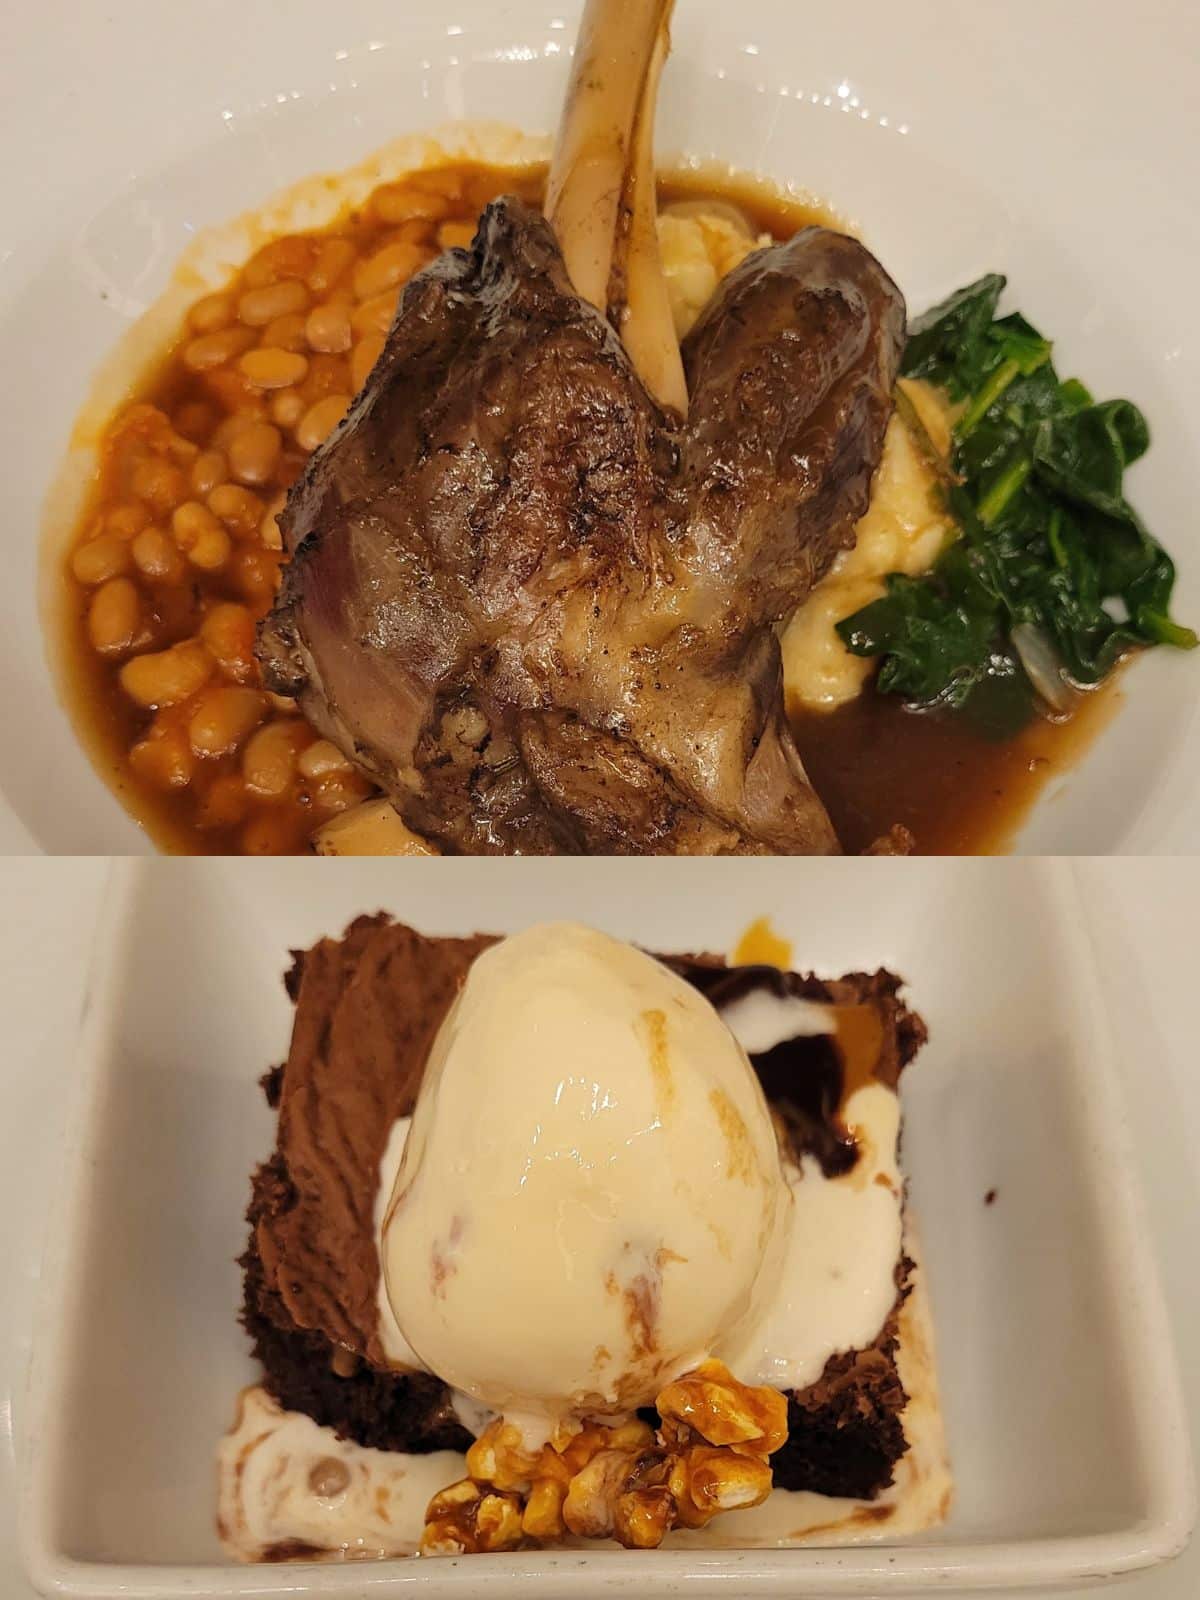 Two photos: one is braised lamb on top of mashed potatoes, baked beans, and a side of spinach. 